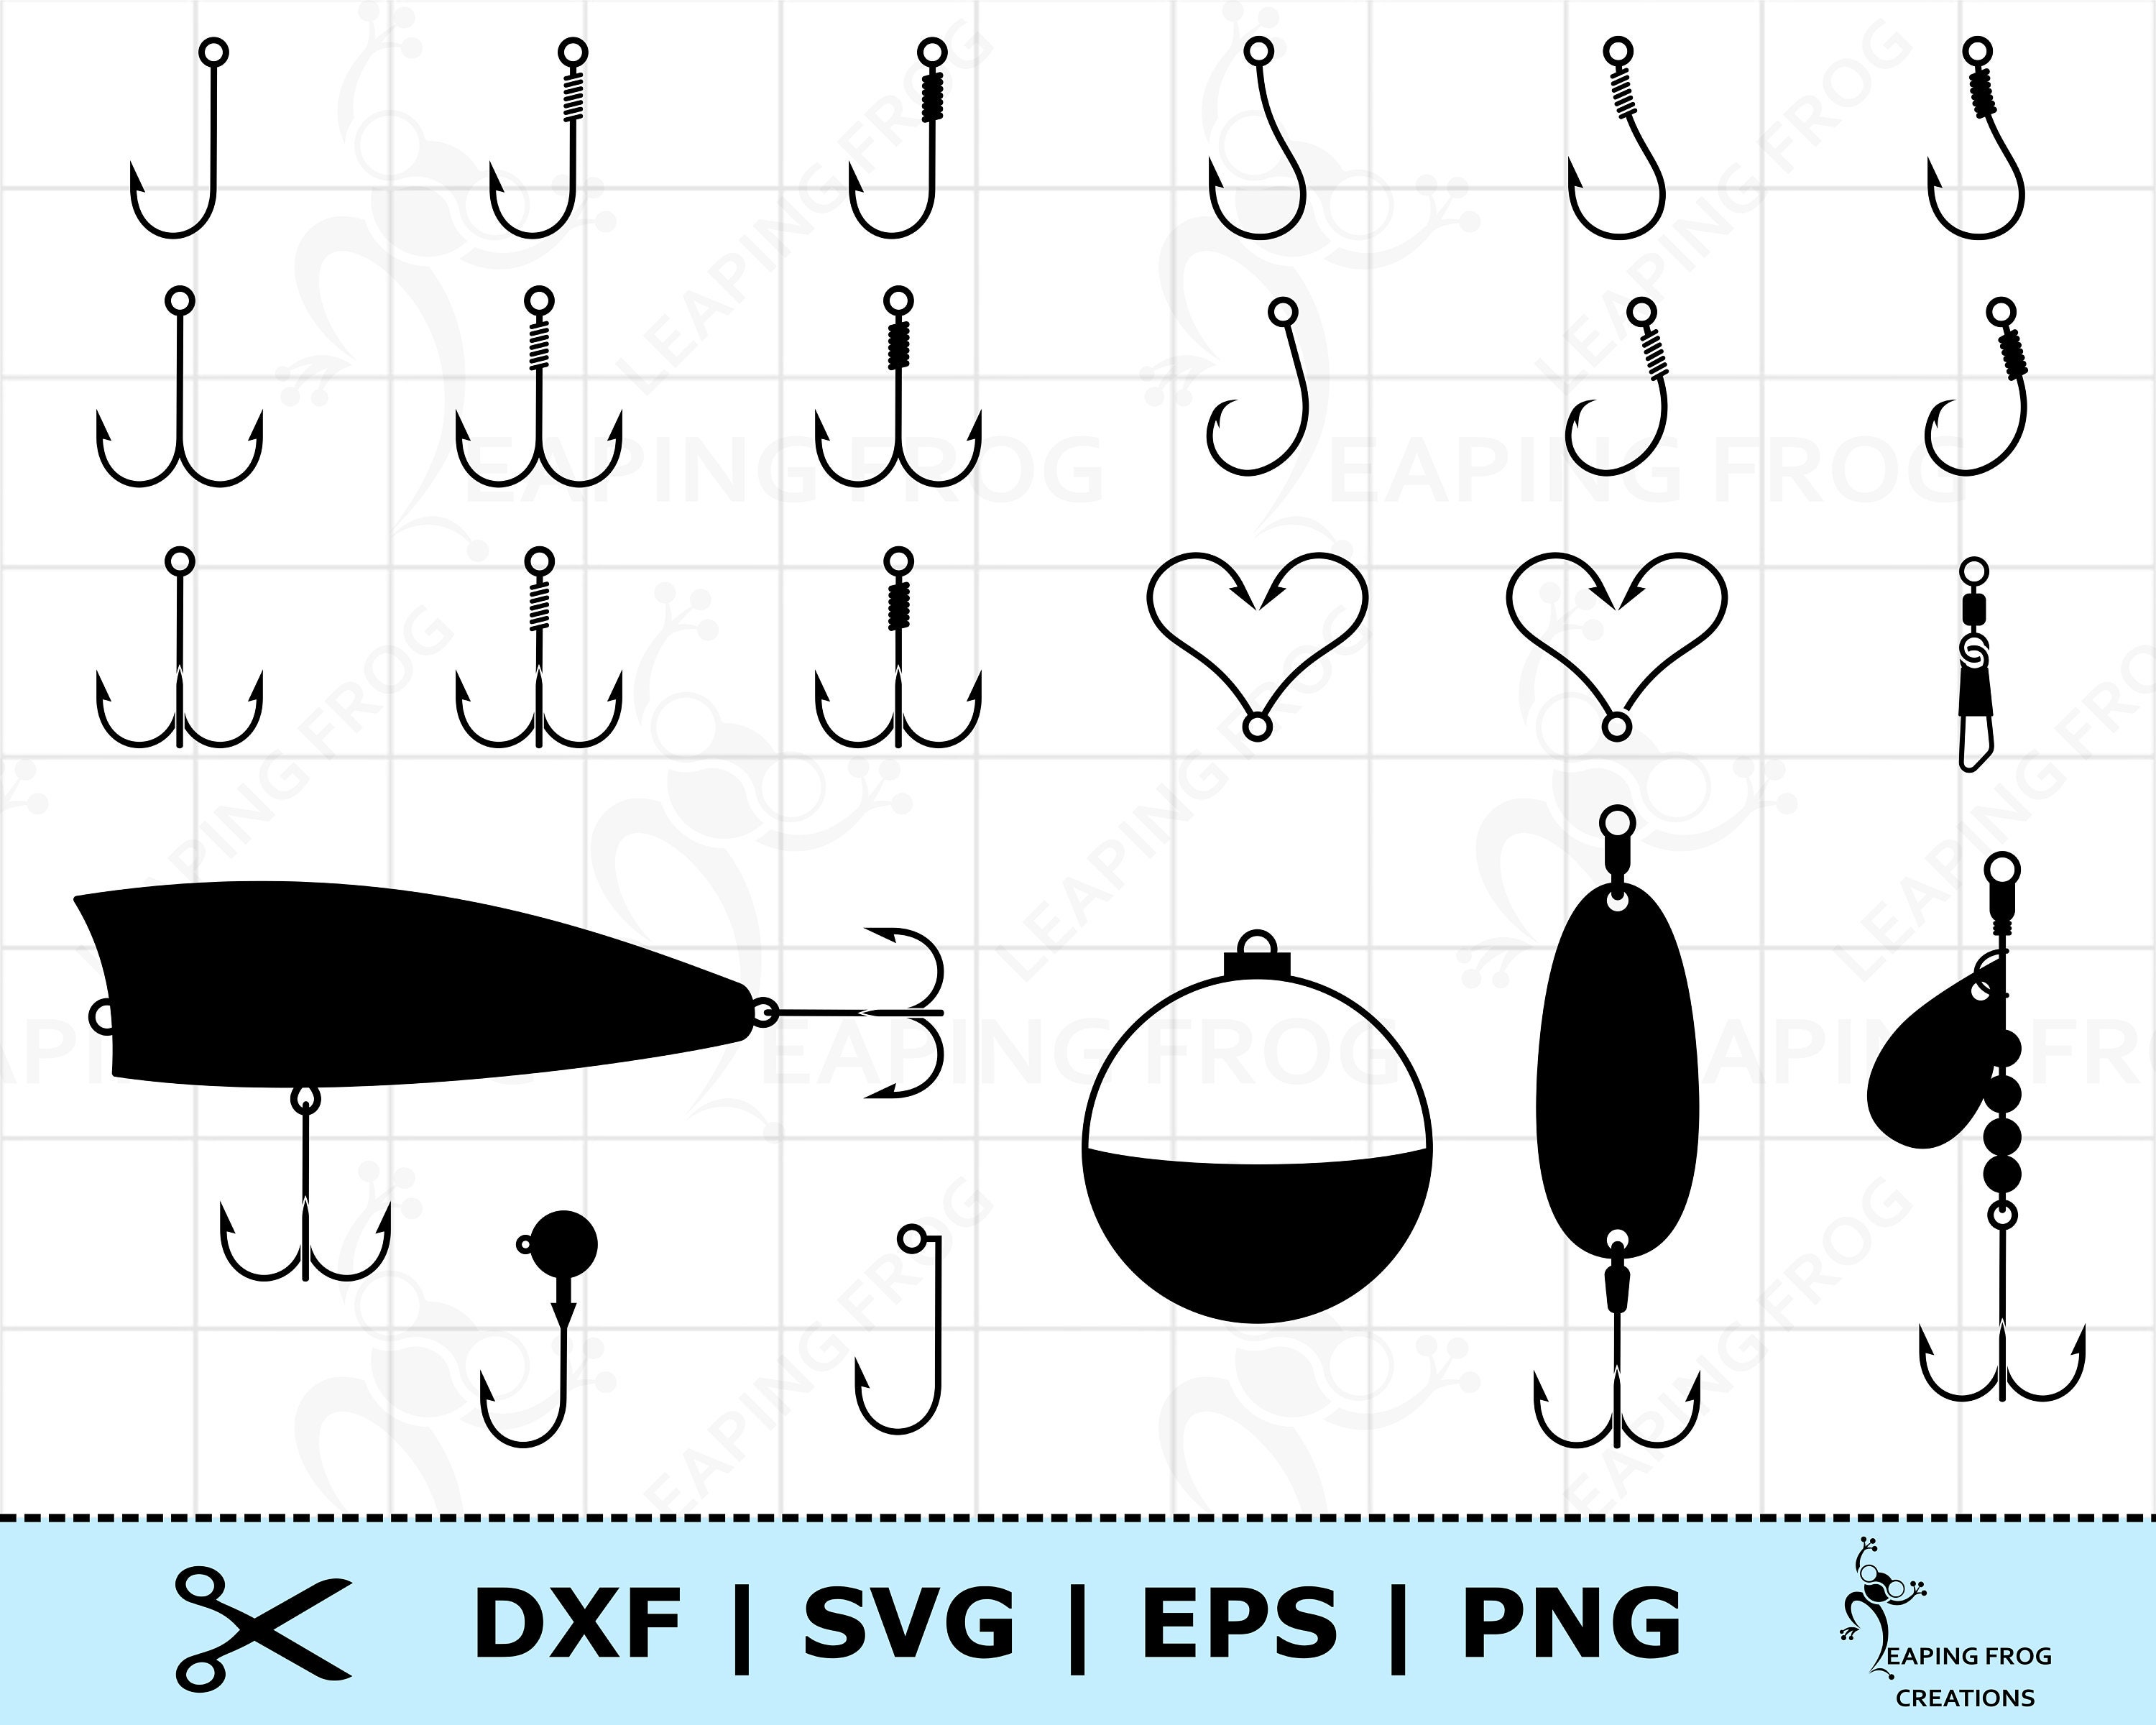 Fish Hook SVG. Fishing Tackle Svg. Fishing Lures Svg. Bobber Svg. Cricut  Cut Files, Layered Files. Silhouette. Fishing Clipart. Dxf Eps Png 